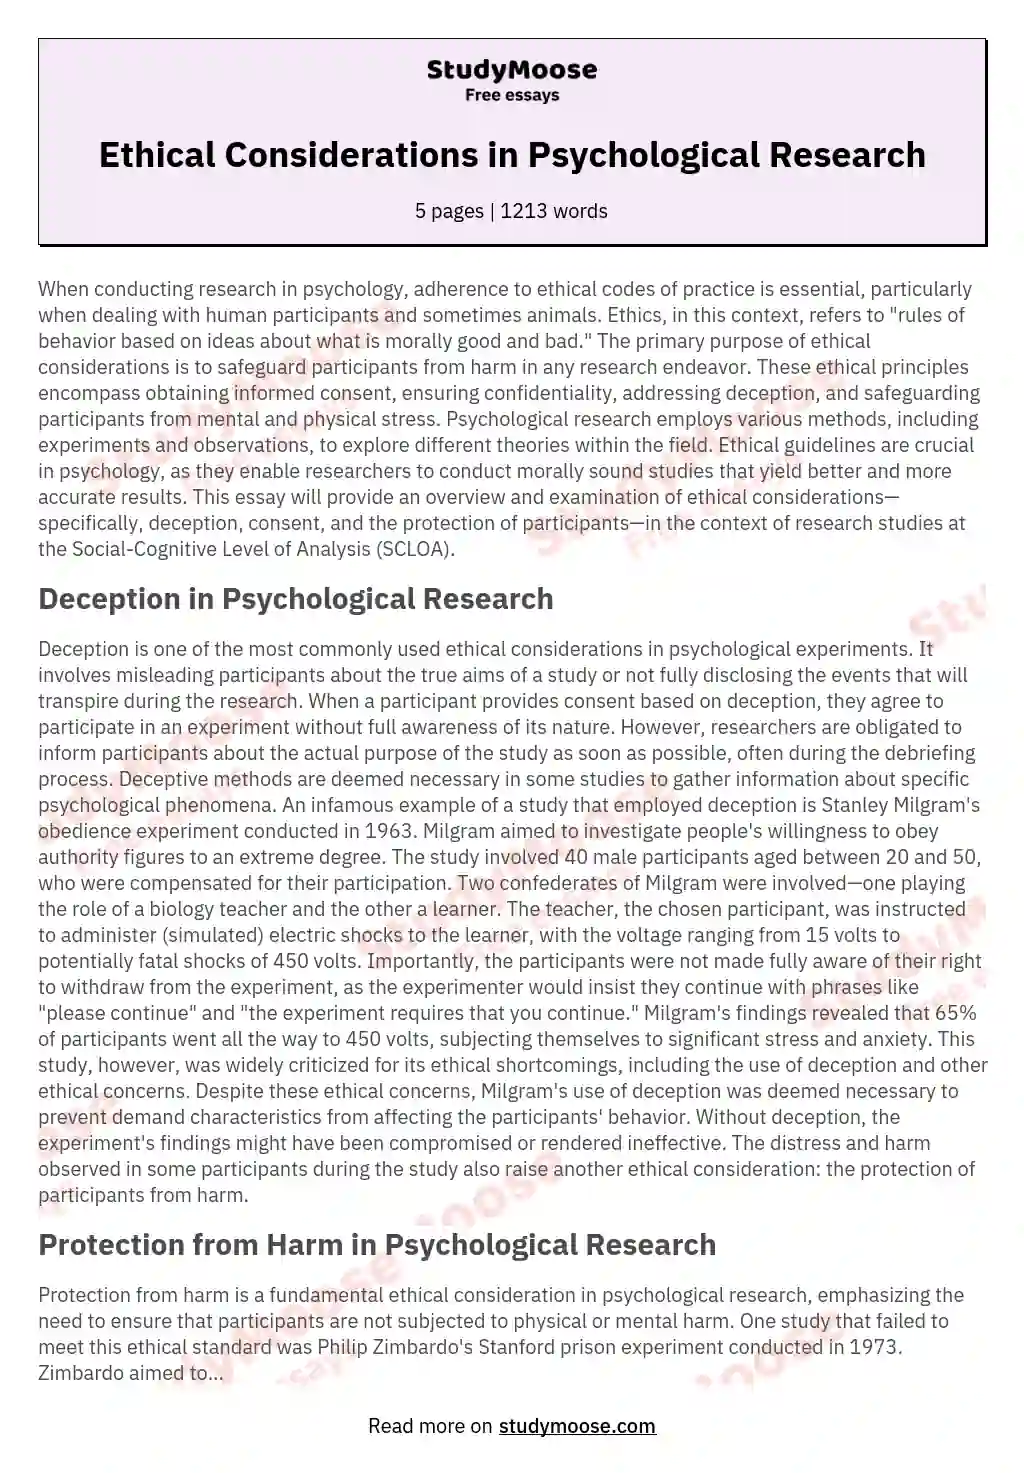 Ethical Considerations in Psychological Research essay